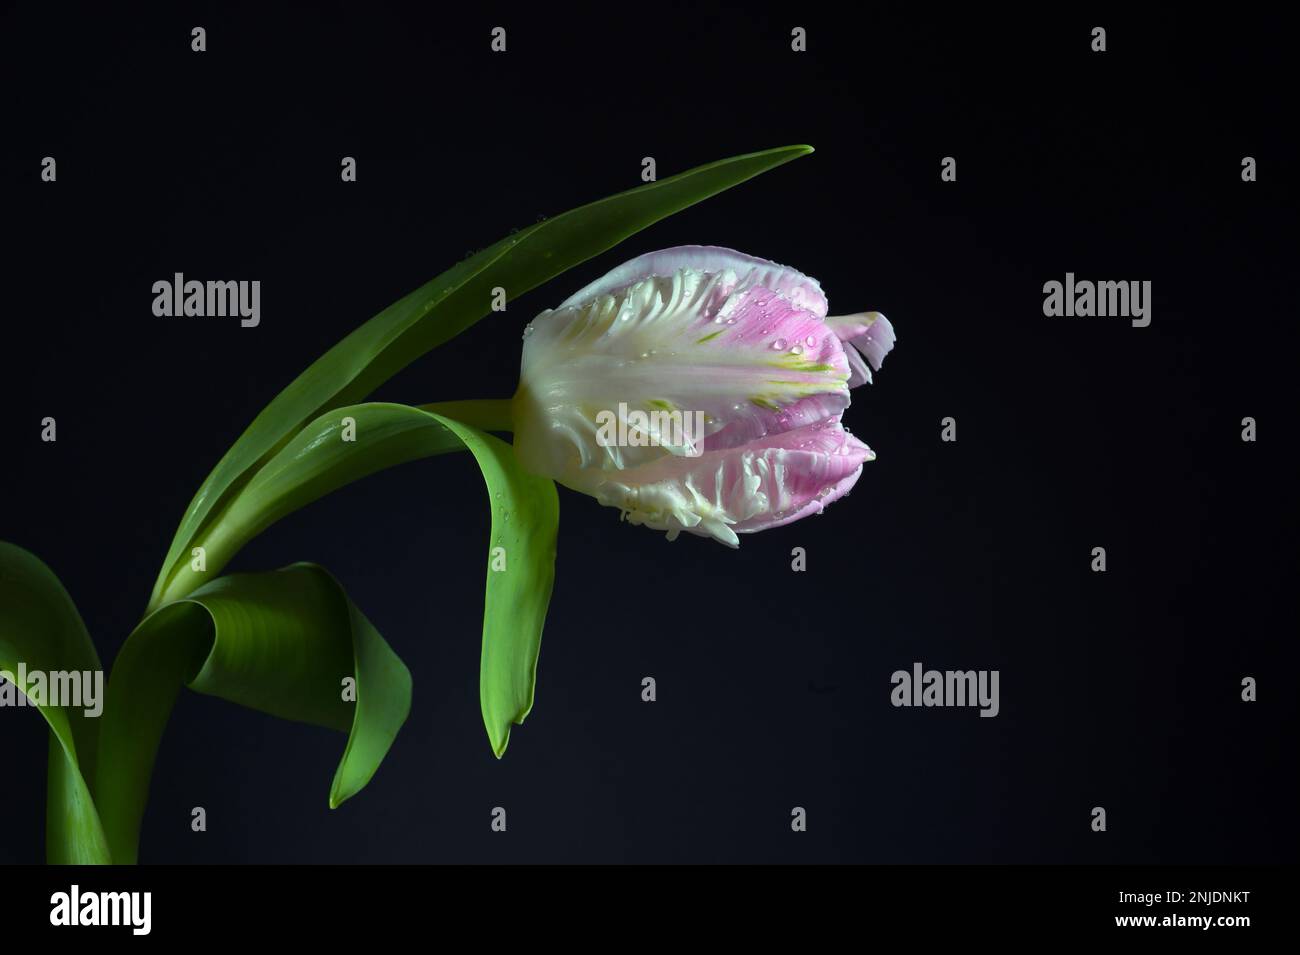 Flower head of a parrot tulip in white and pink with water drops against a black background, copy space, selected focus, narrow depth of field Stock Photo